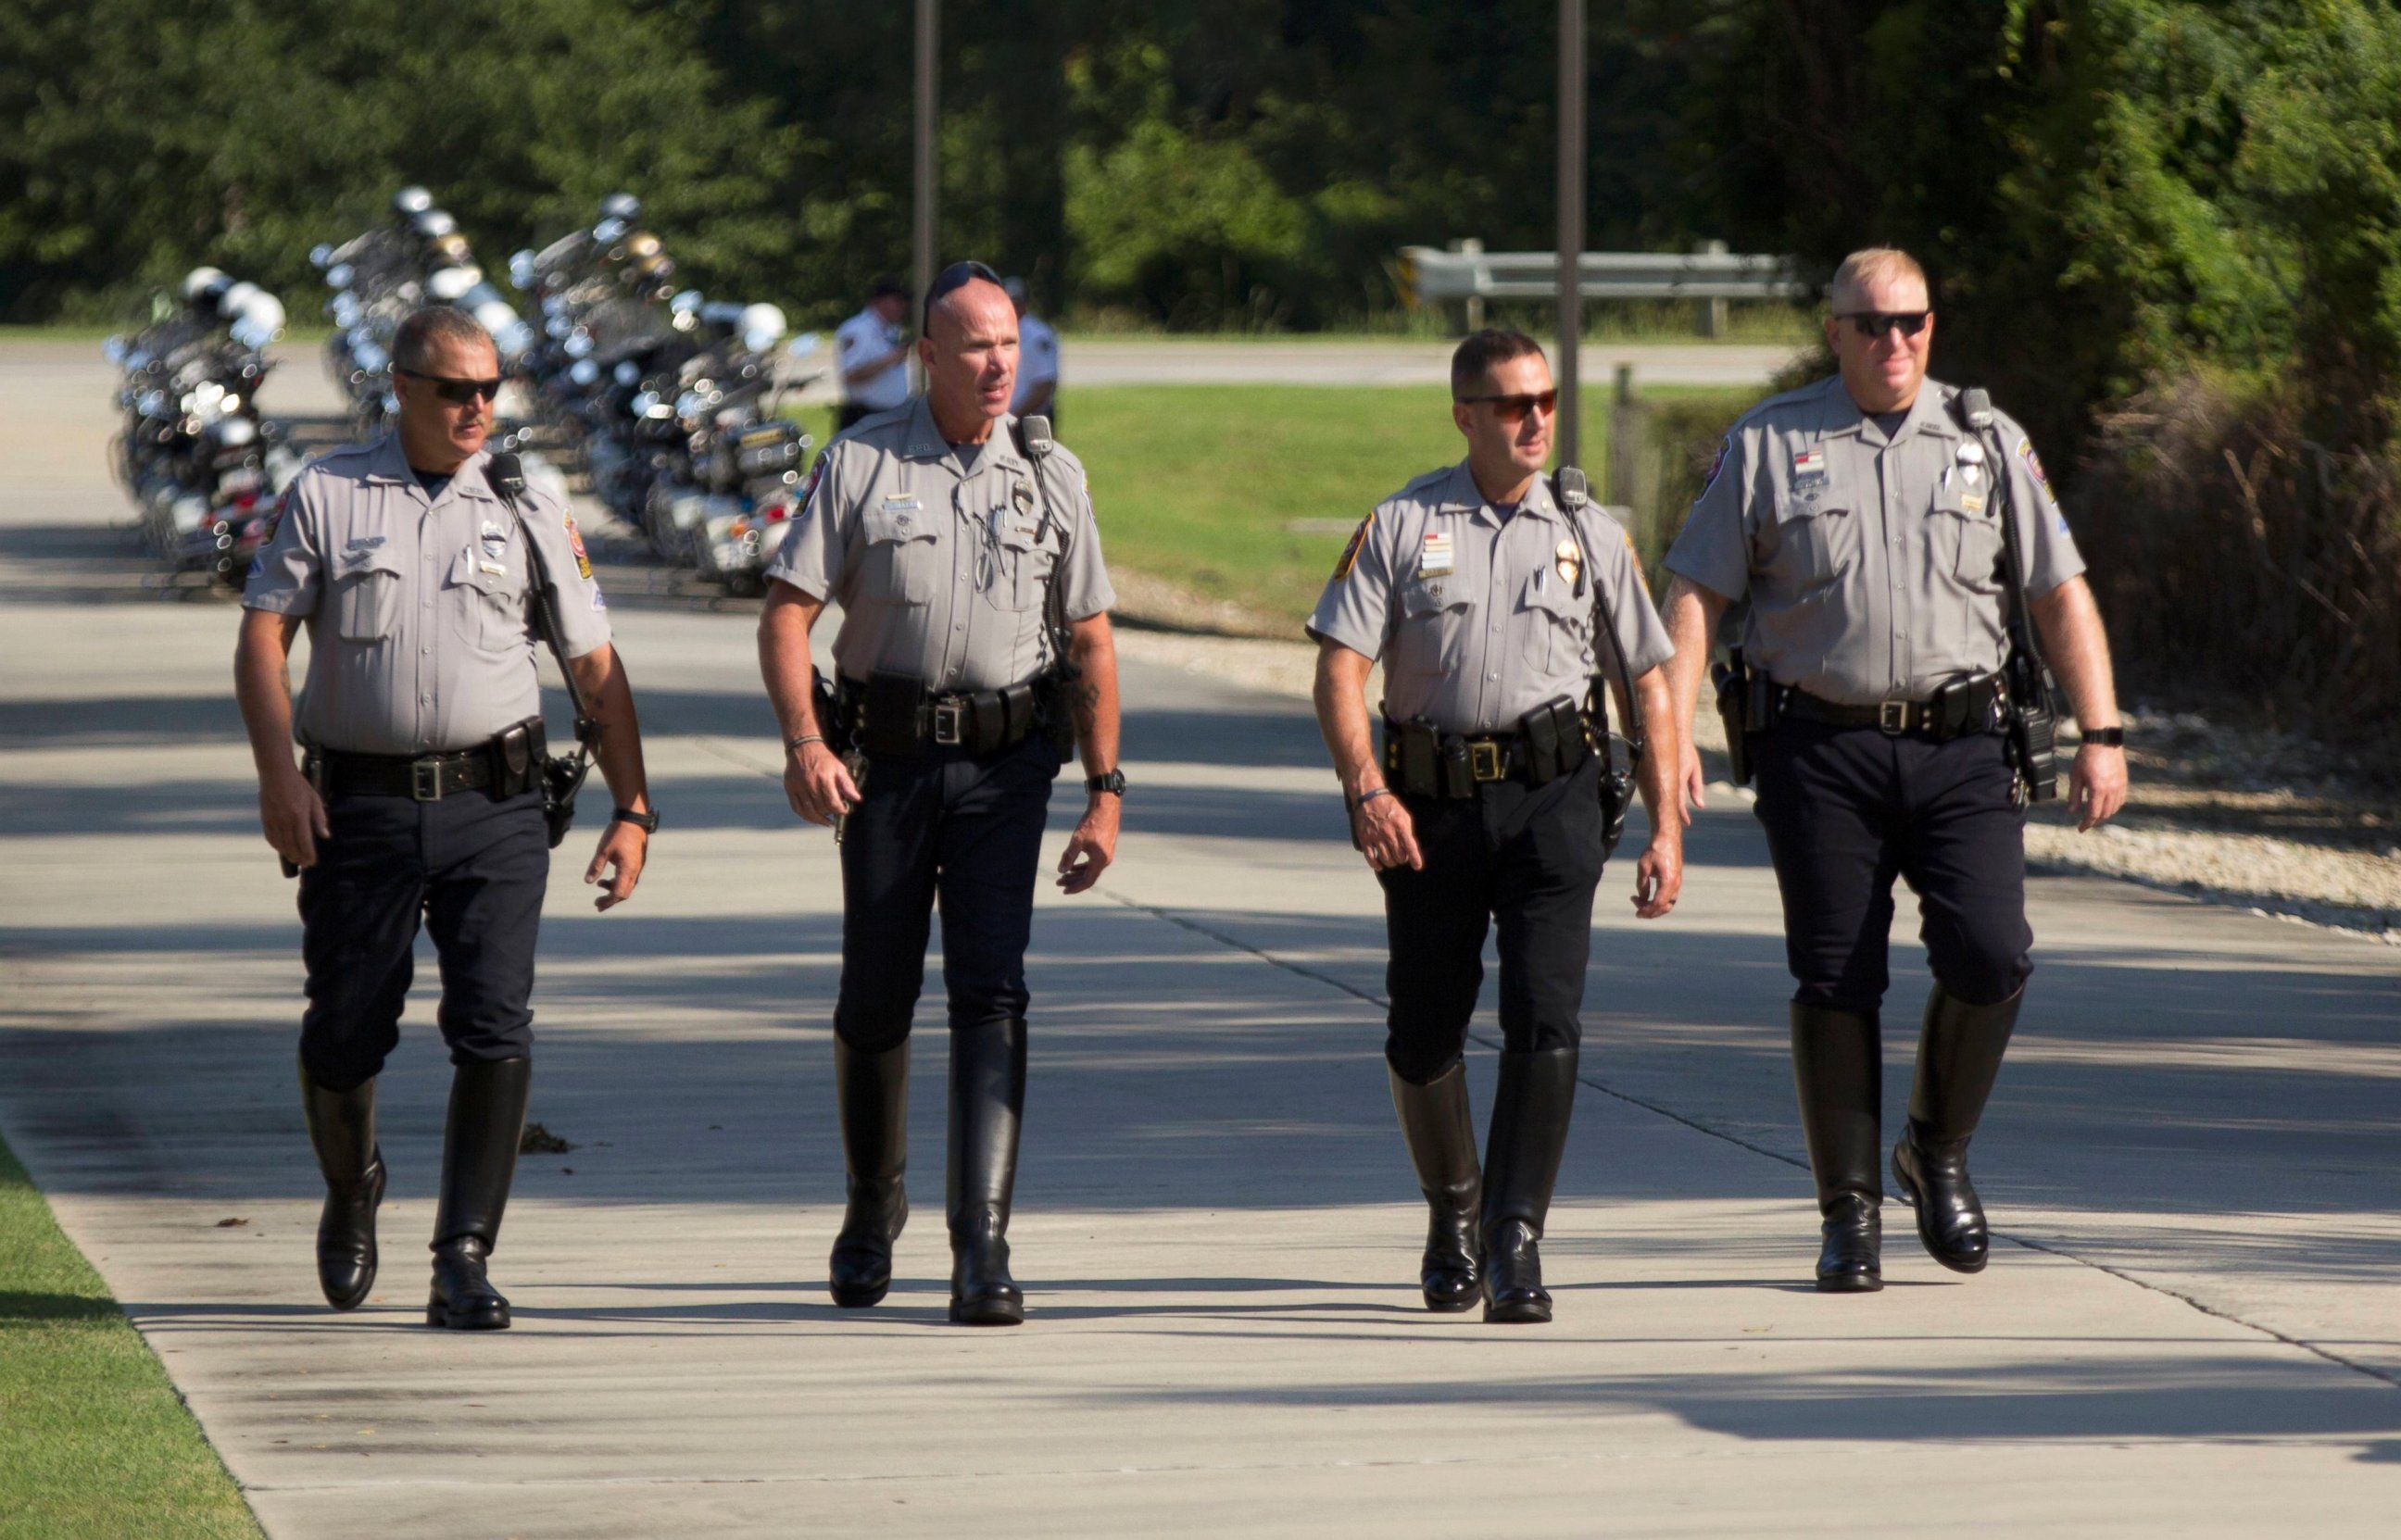 PHOTO: Motorcycle patrolmen arrive to the funeral services for police officer Matthew Gerald, one of three officers killed by a gunman on July 17, at Healing Place Church in Baton Rouge, Louisiana, July 22, 2016.  